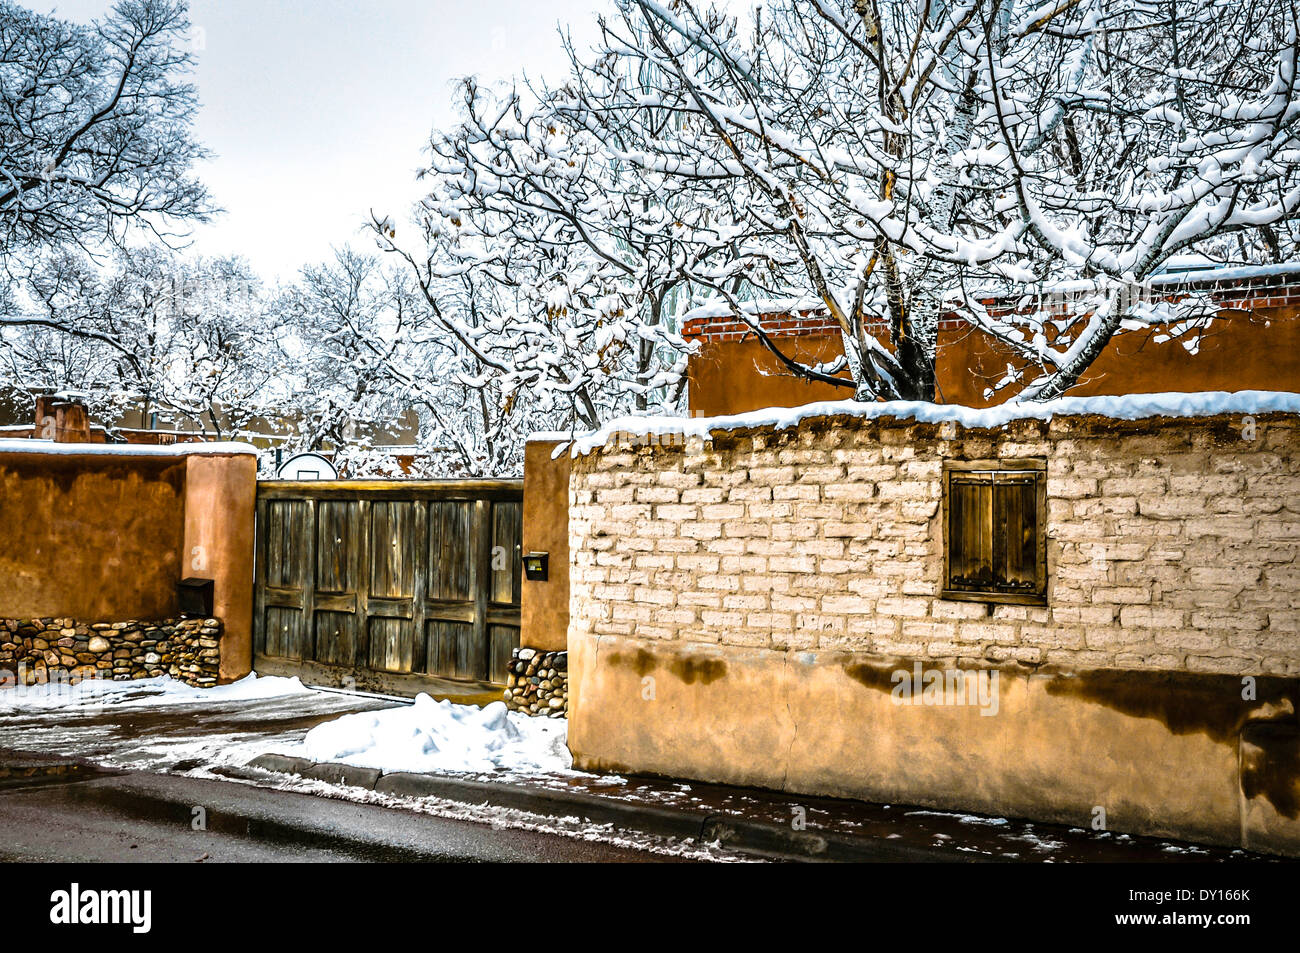 A winter snow scene features old and new adobe walls and wooden gate in tree laden Canyon Road area of Santa Fe, NM Stock Photo